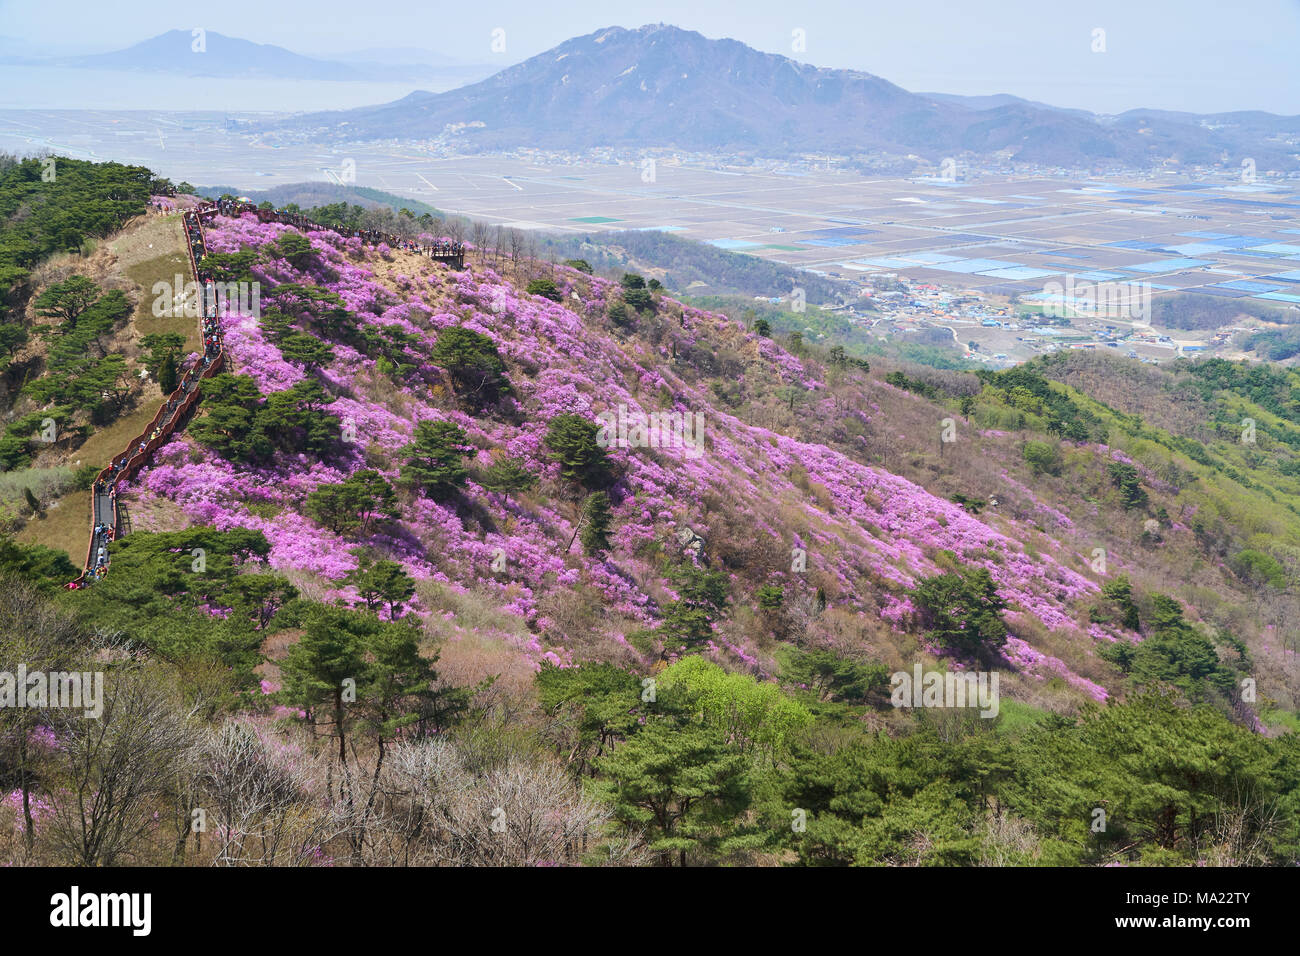 Goryeosan azalea festival, which is held at the end of April every year. Goryeosan is a highest mountain in Ganghwa island. Stock Photo